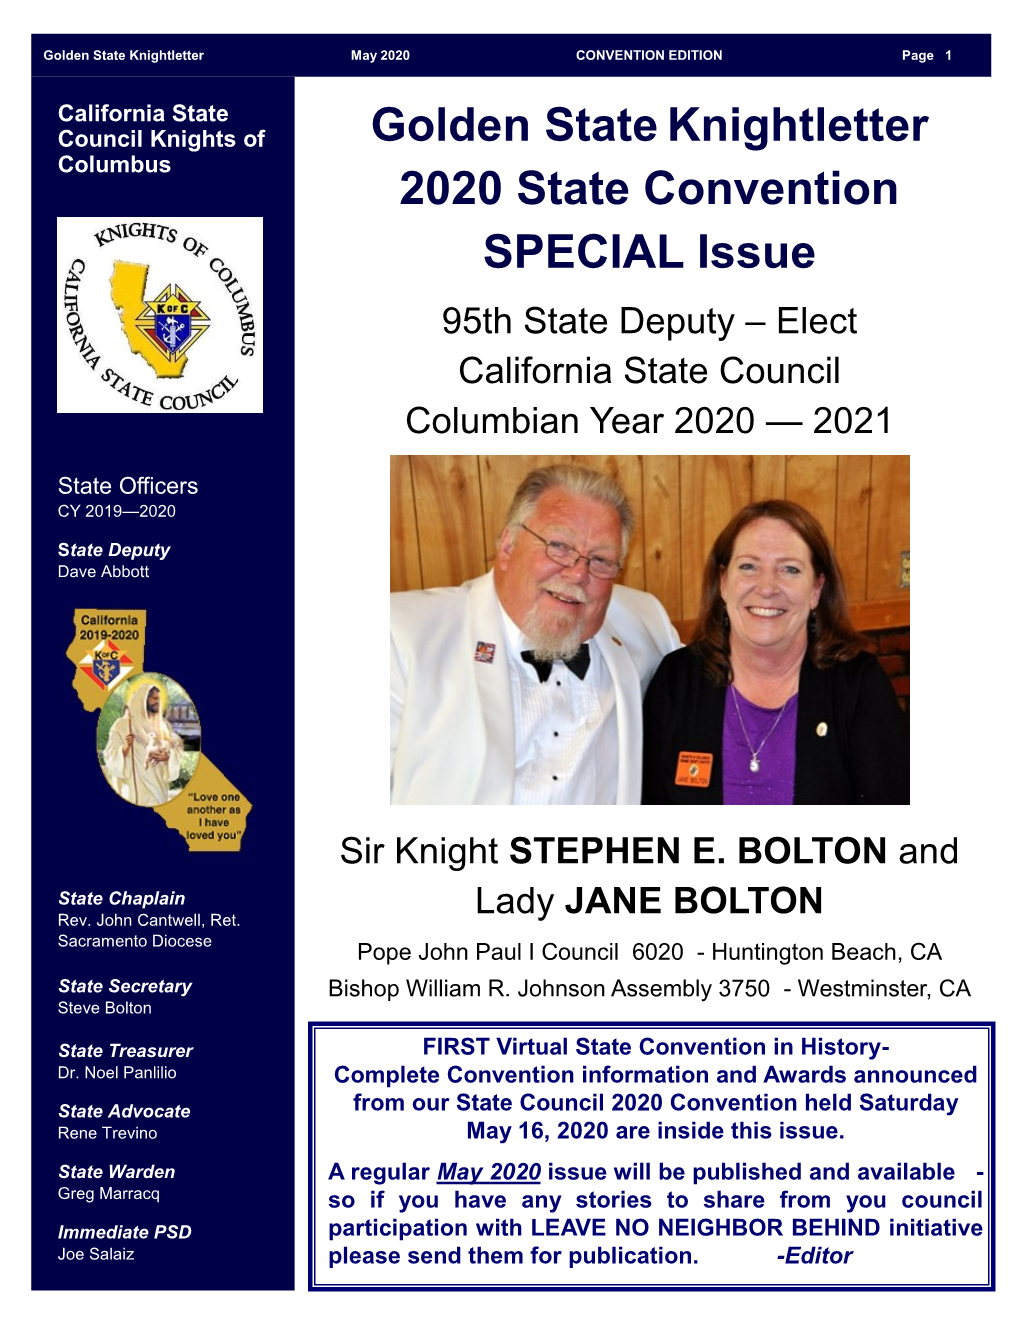 Golden Stateknightletter 2020 State Convention SPECIAL Issue